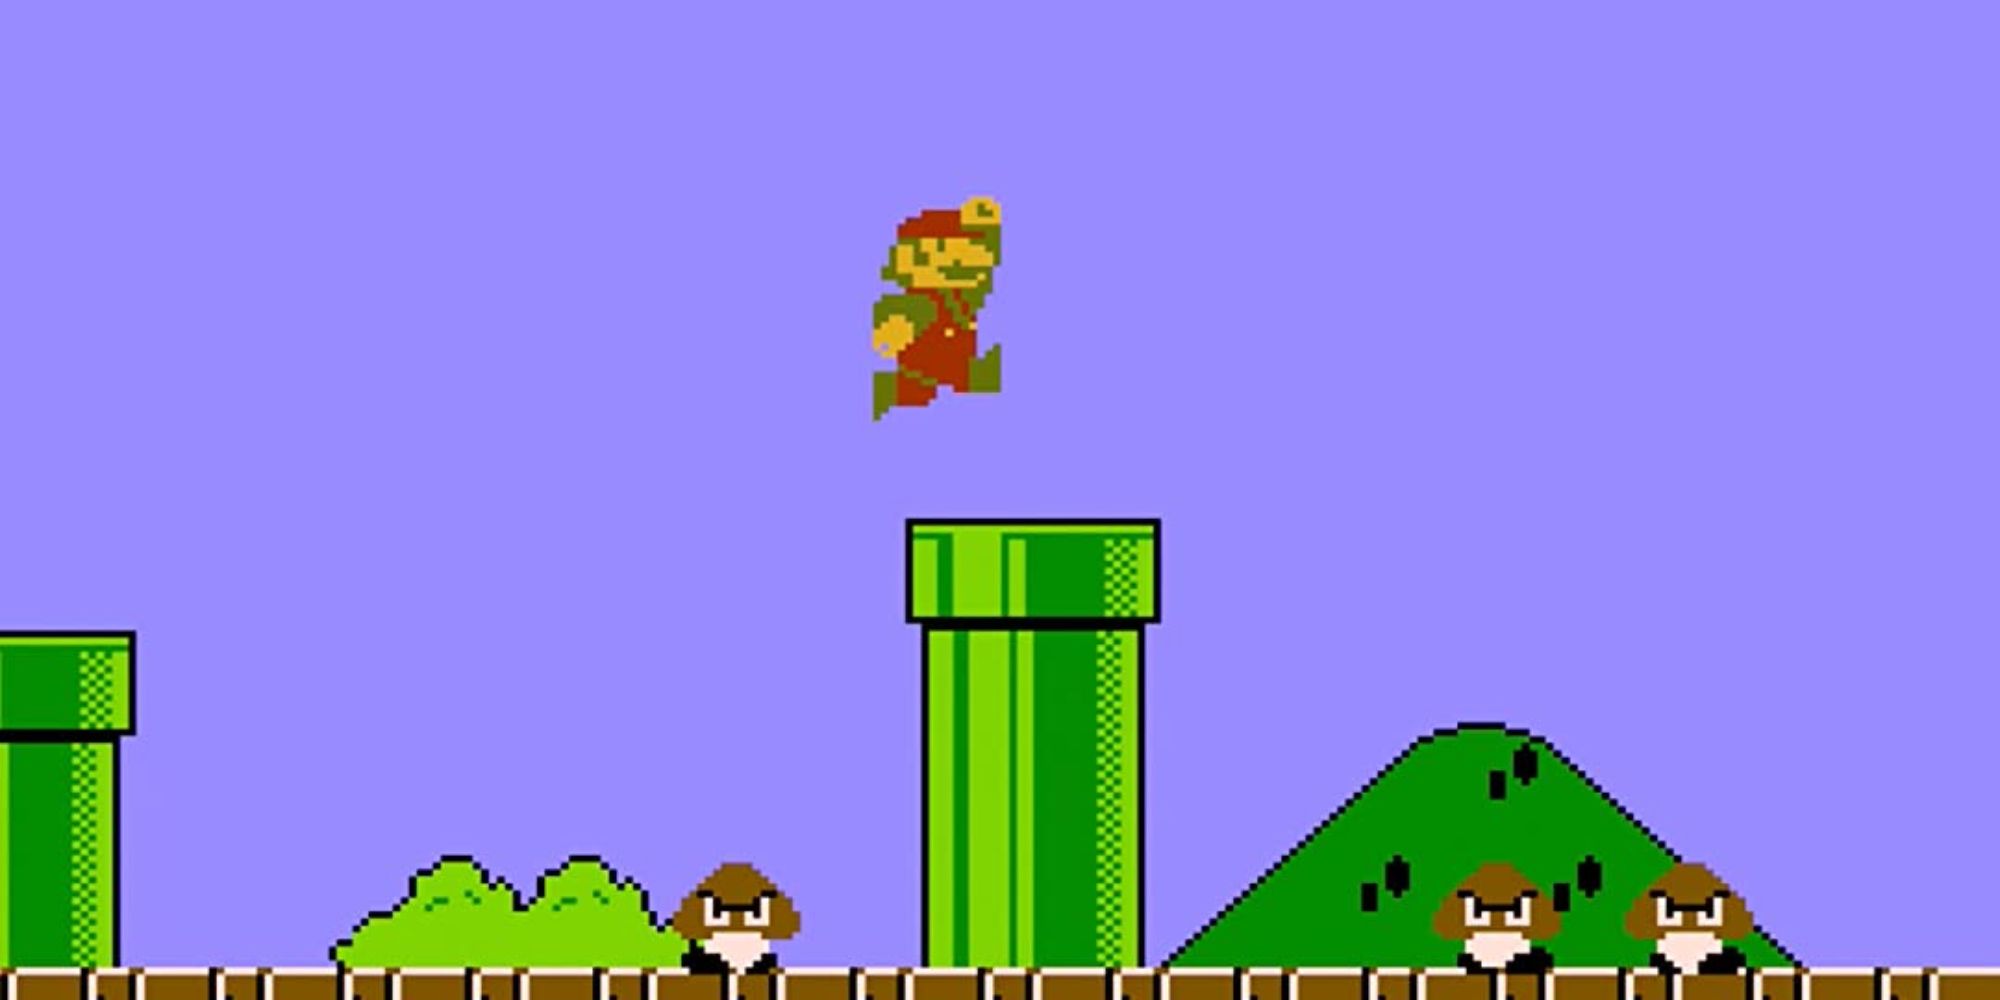 Video Game Sound Effects a wide shot of the classic Mario game with Mario jumping over a green pipe while Goombas roam around beneath him